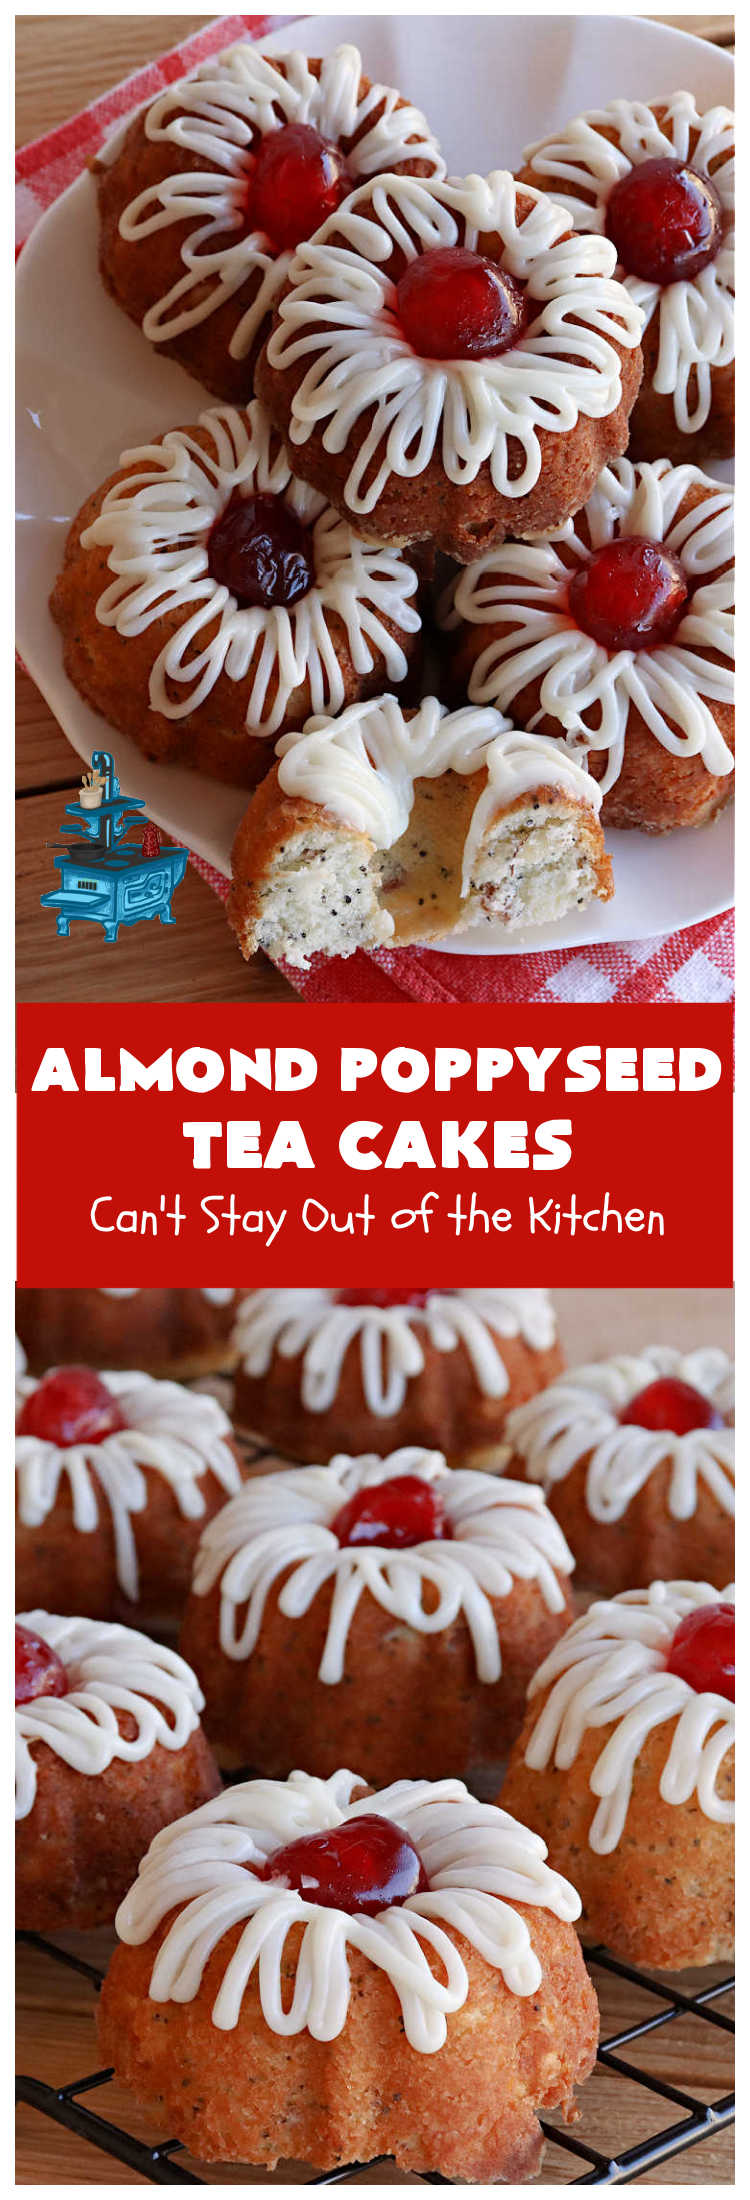 Almond Poppyseed Tea Cakes | Can't Stay Out of the Kitchen | these amazing #TeaCakes are irresistible & mouthwatering. They include both #almond flavoring & #almonds along with #poppyseeds to give flavor & texture to the #cake. These are fantastic for #holiday or #Christmas parties, but delightful enough to make all year long. Prepare to drool over every bite! #dessert #HolidayDessert #AlmondPoppyseedTeaCakes